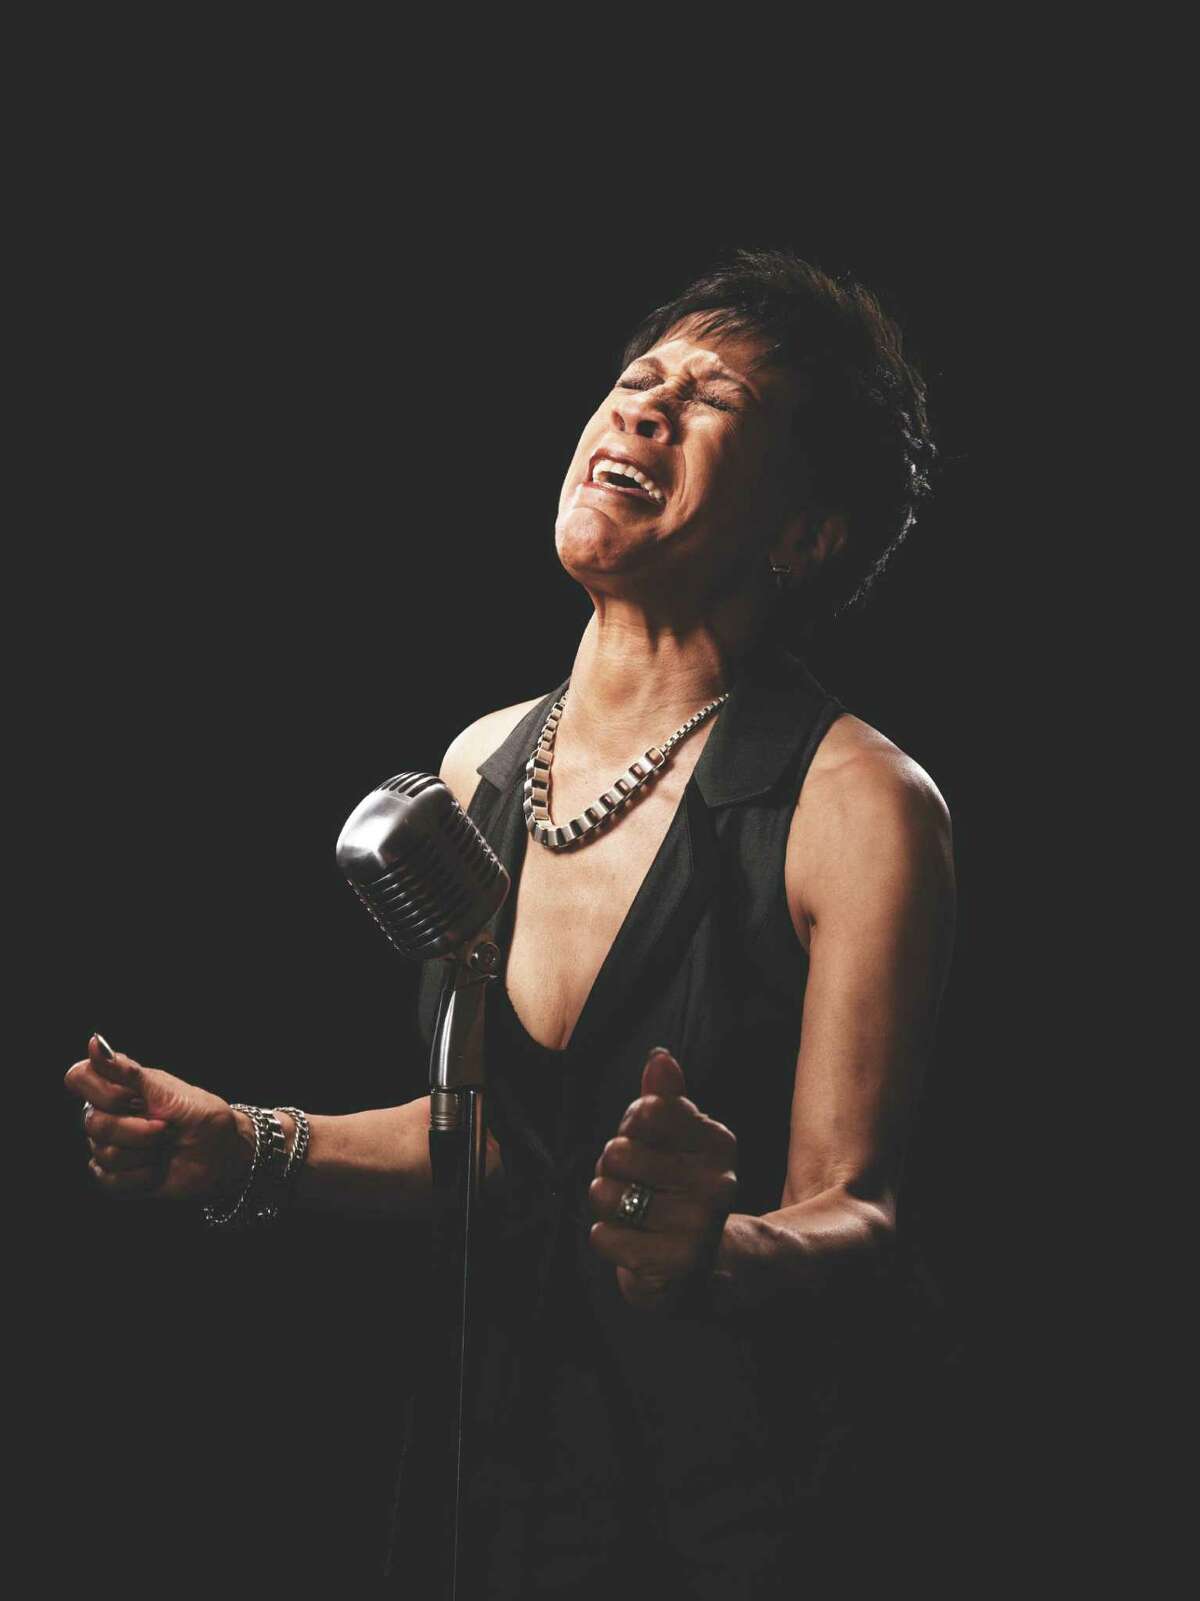 R&B/soul singer Bettye Lavette, whose resume includes the 1962 hit "My Man -- He's a Loving Man" and the book "A Woman Like Me."